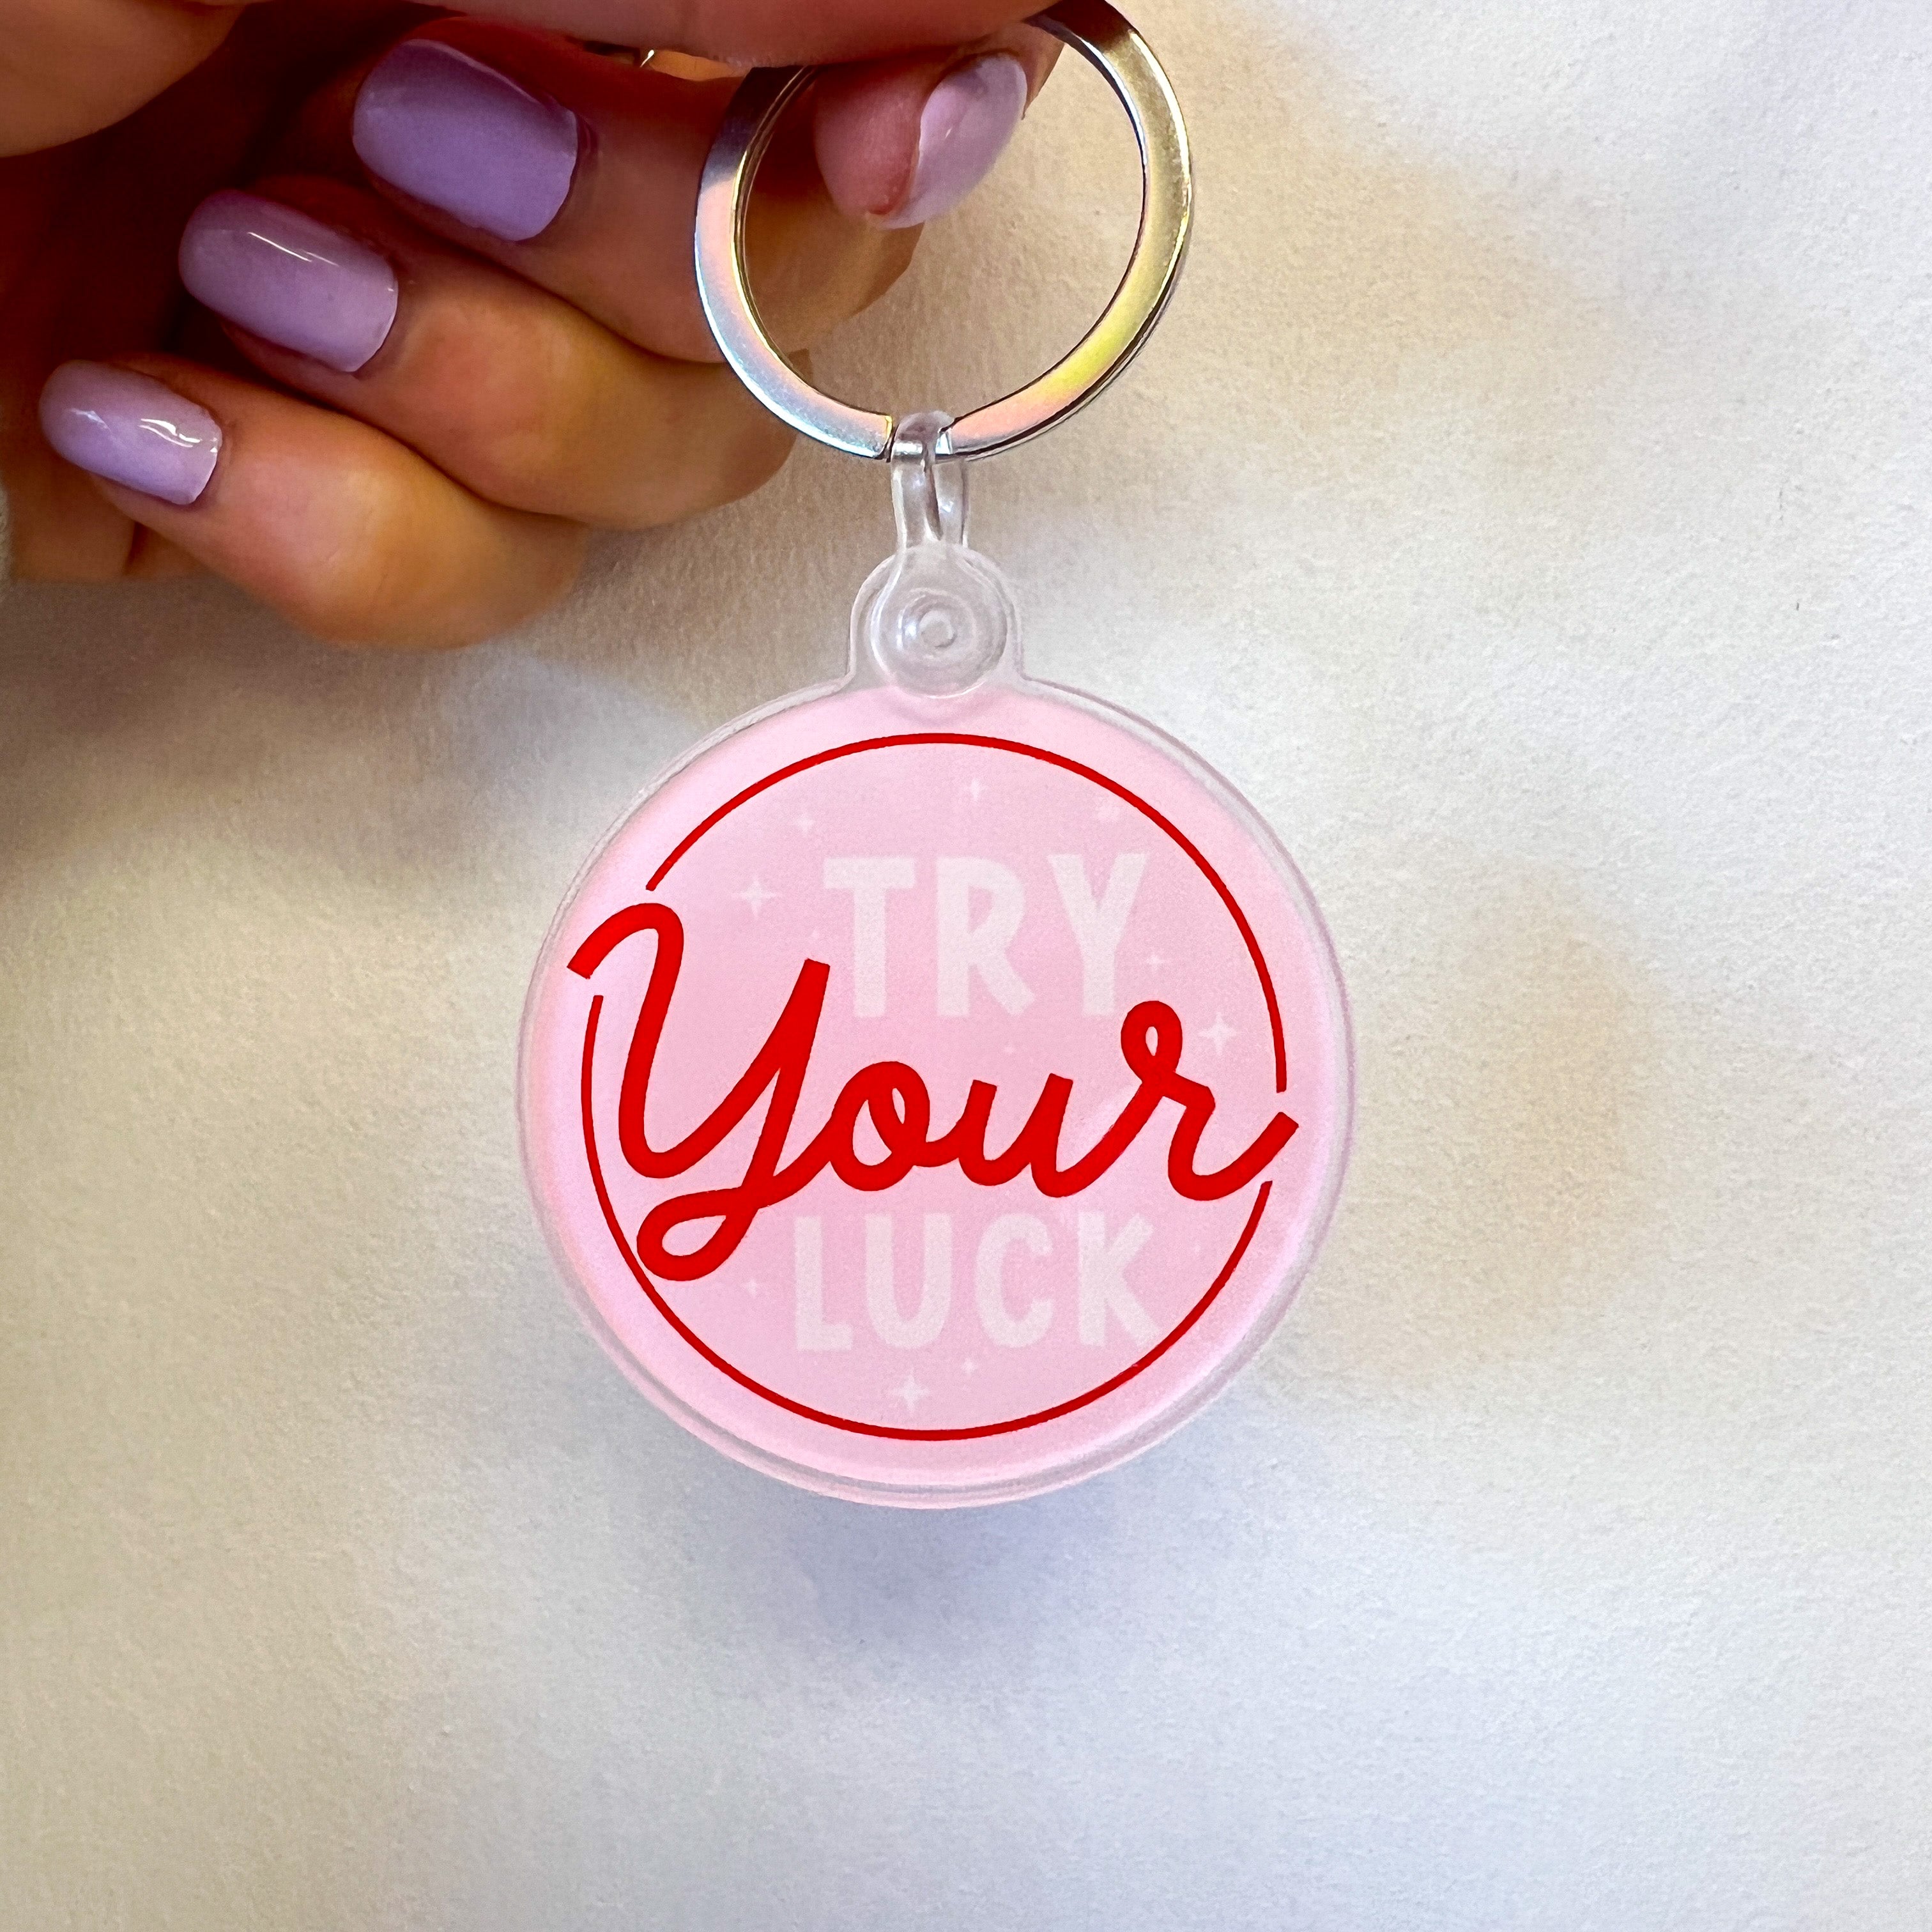 Try your luck keychain